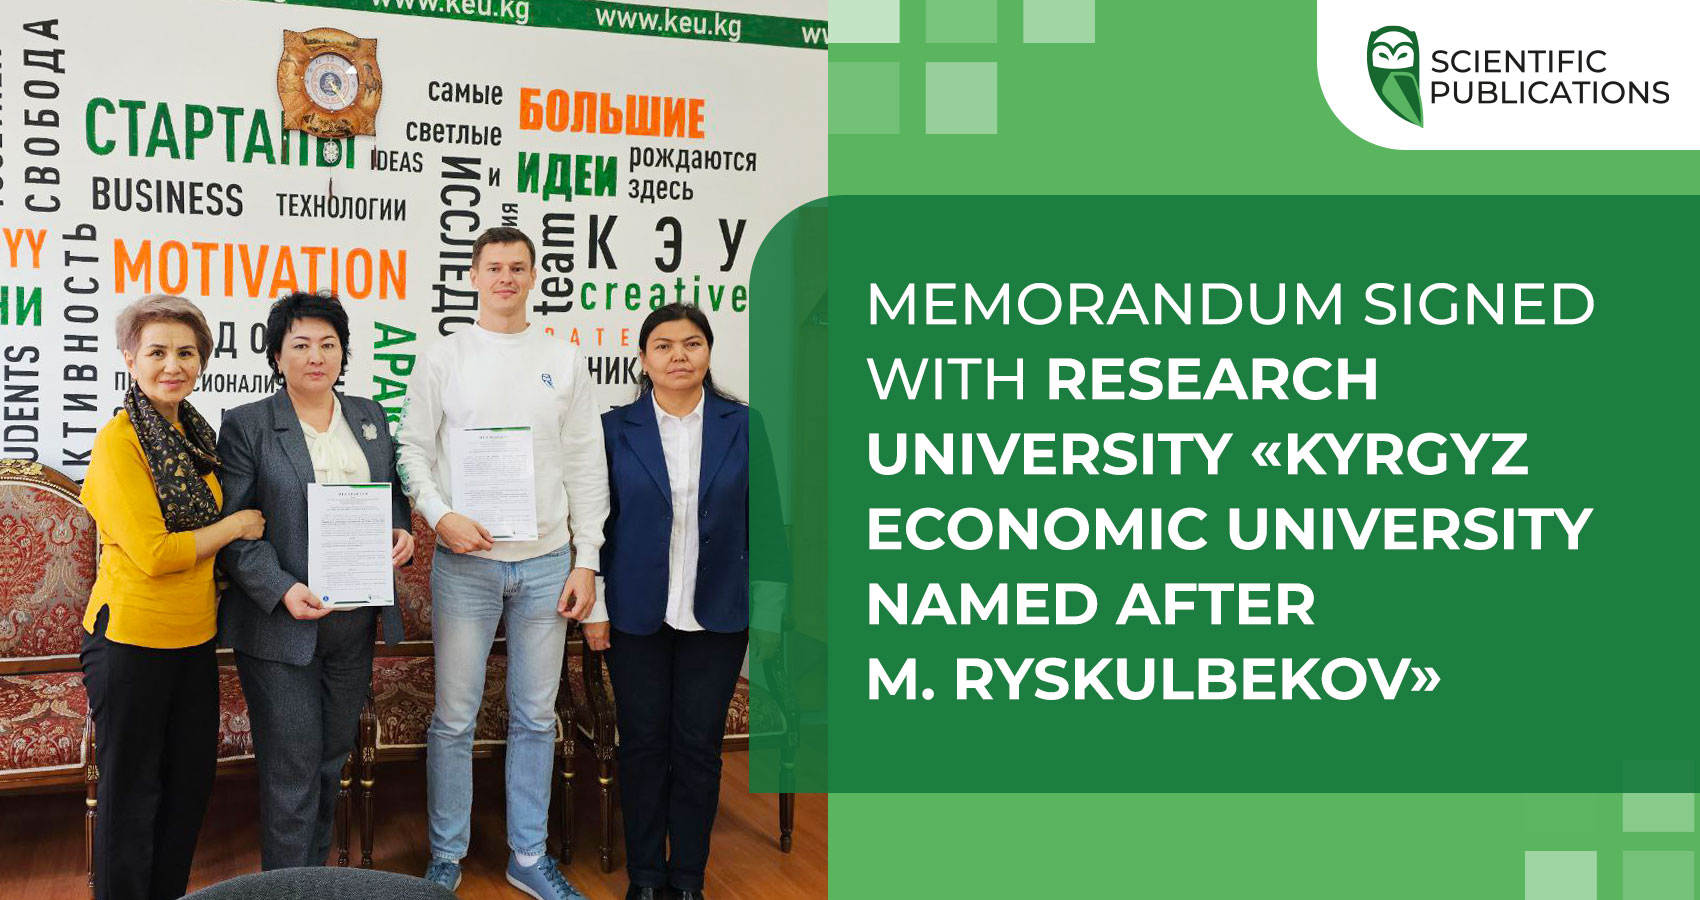 Memorandum signed with the Research University 